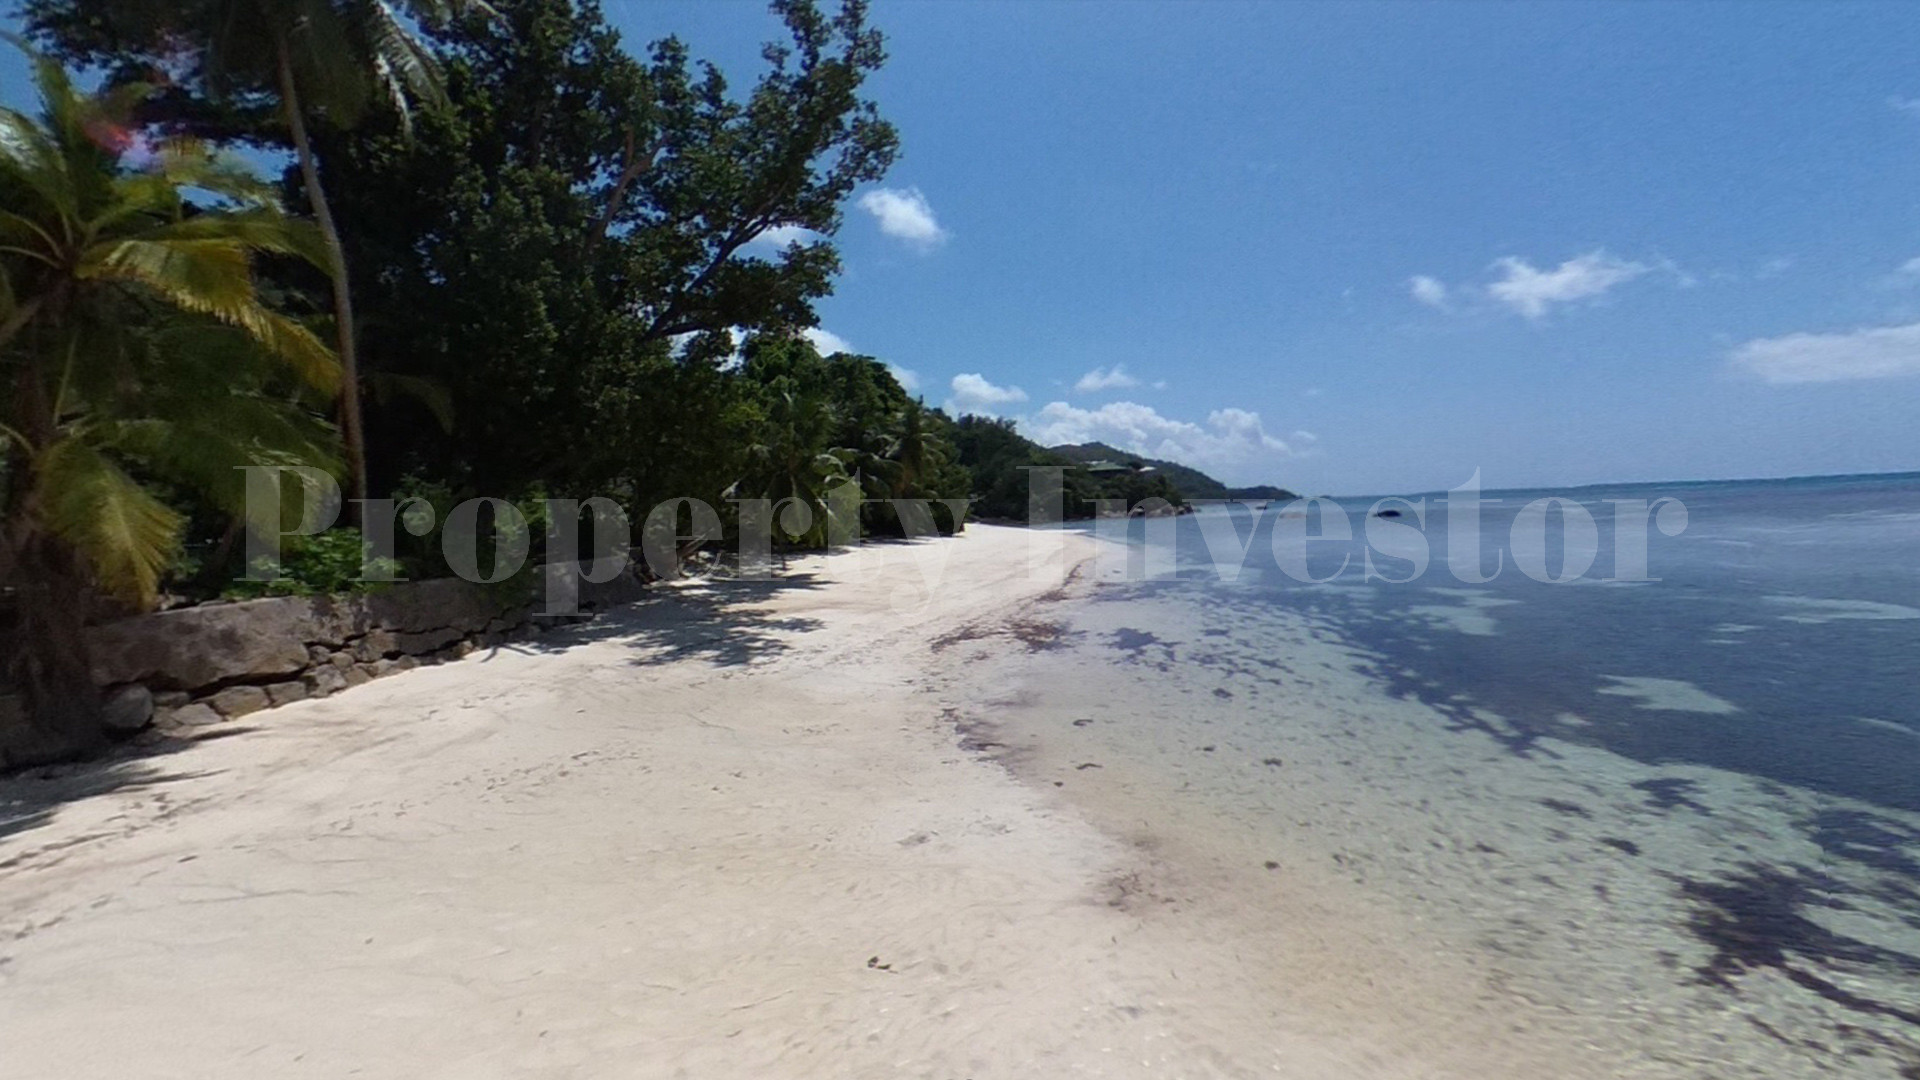 Beautiful 1.5 Hectare Beachfront Lot with Great Residential & Commercial Development Potential for Sale on Praslin Island, Seychelles